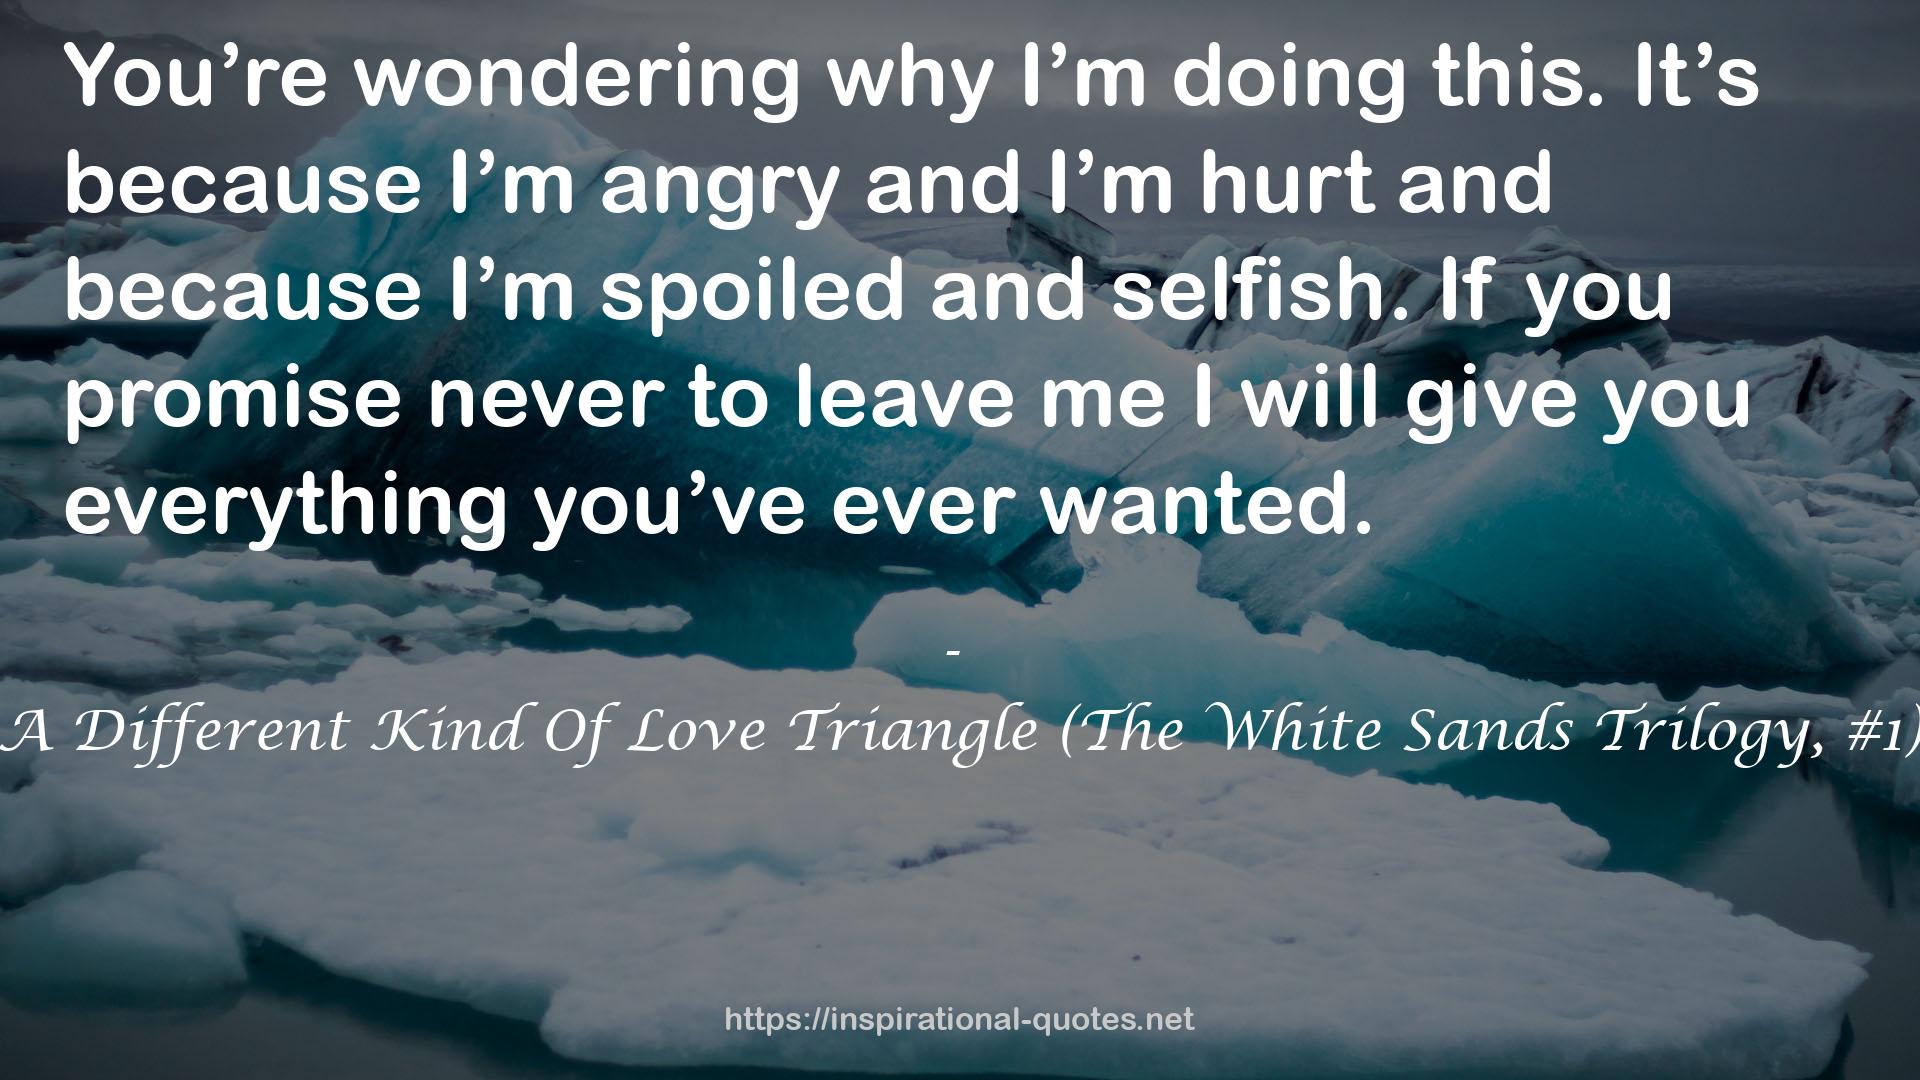 A Different Kind Of Love Triangle (The White Sands Trilogy, #1) QUOTES